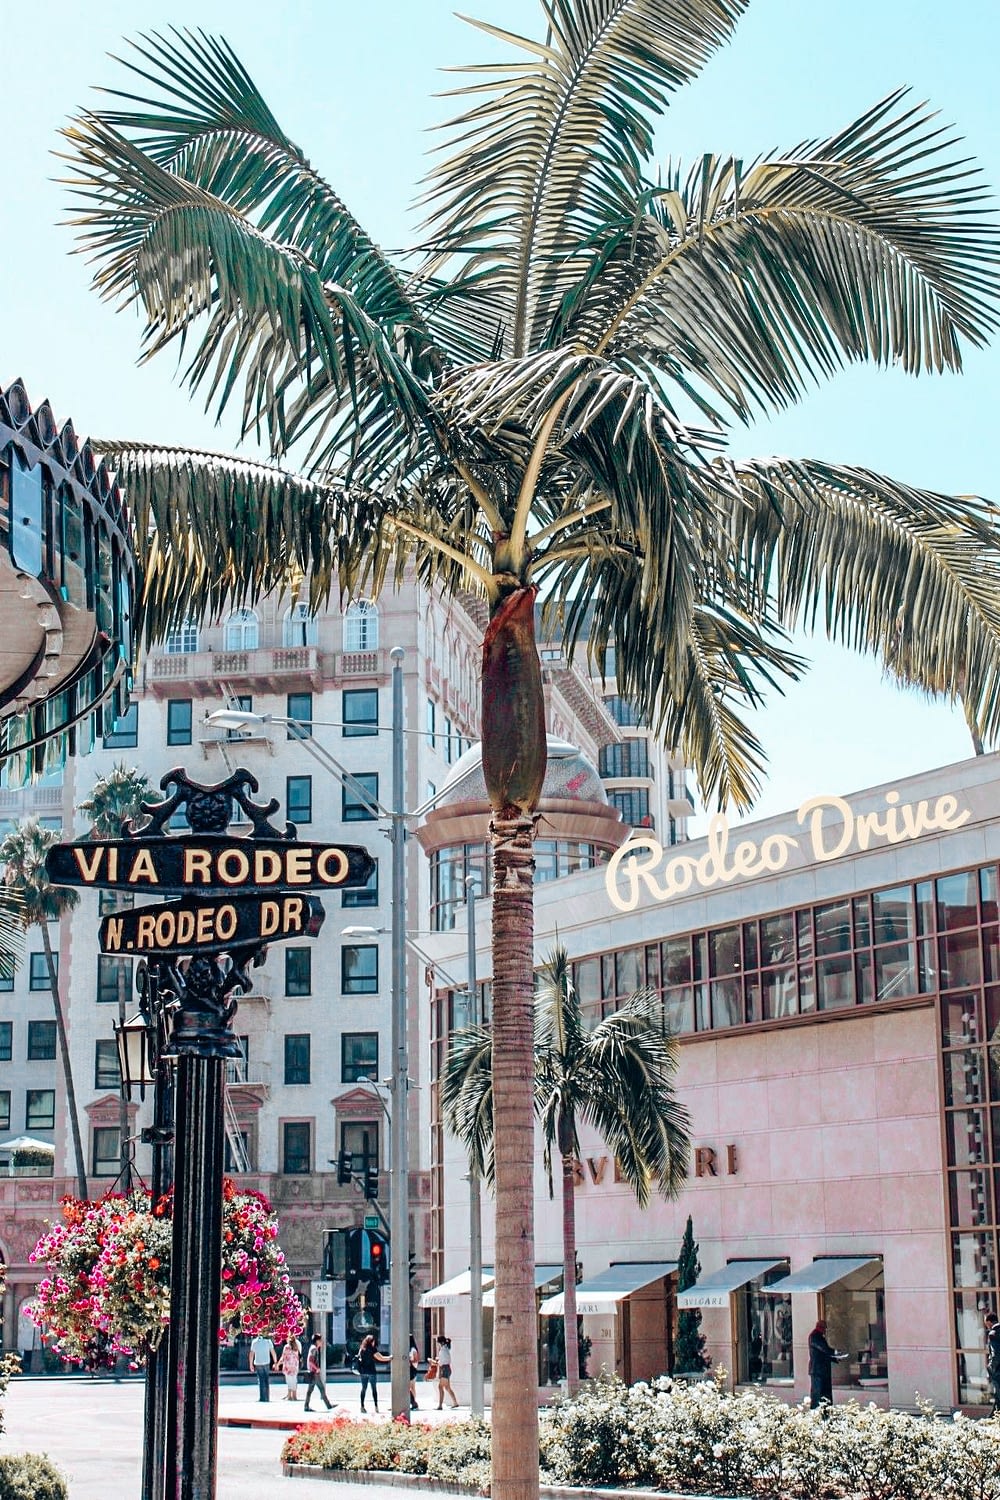 a sign saying rodeo drive with a palm tree